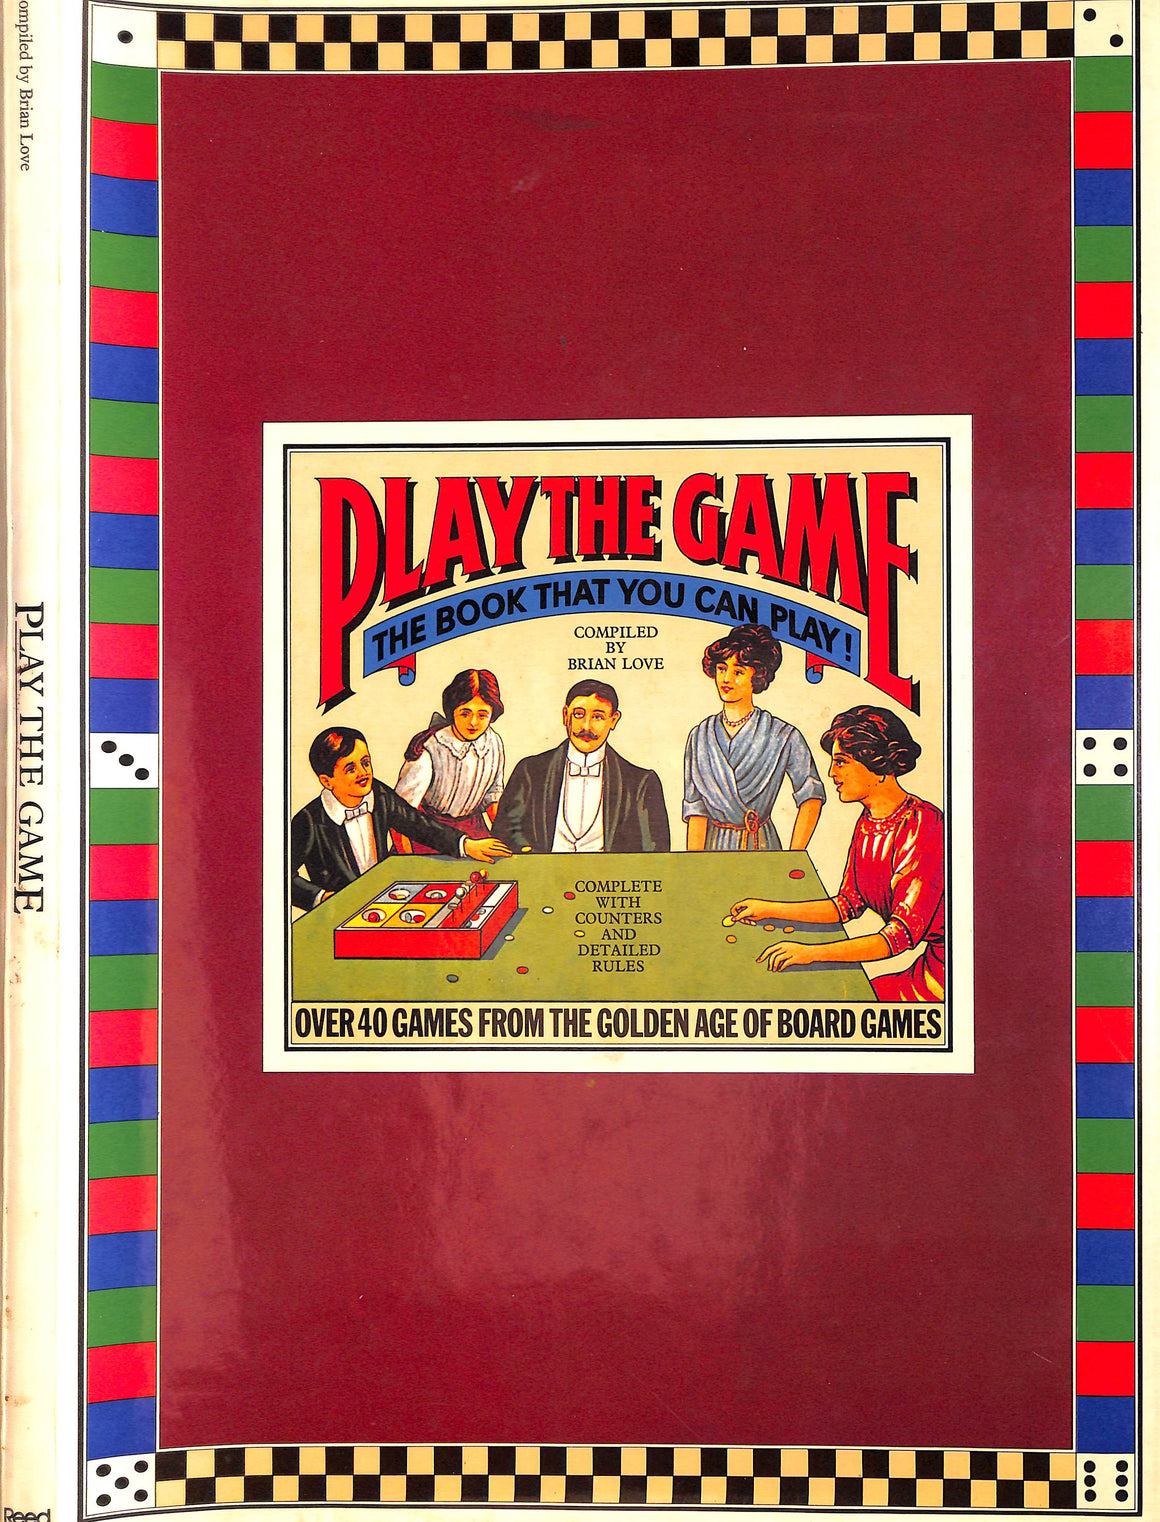 "Play The Game: The Book That You Can Play!" 1978 LOVE, Brian [compiled by]